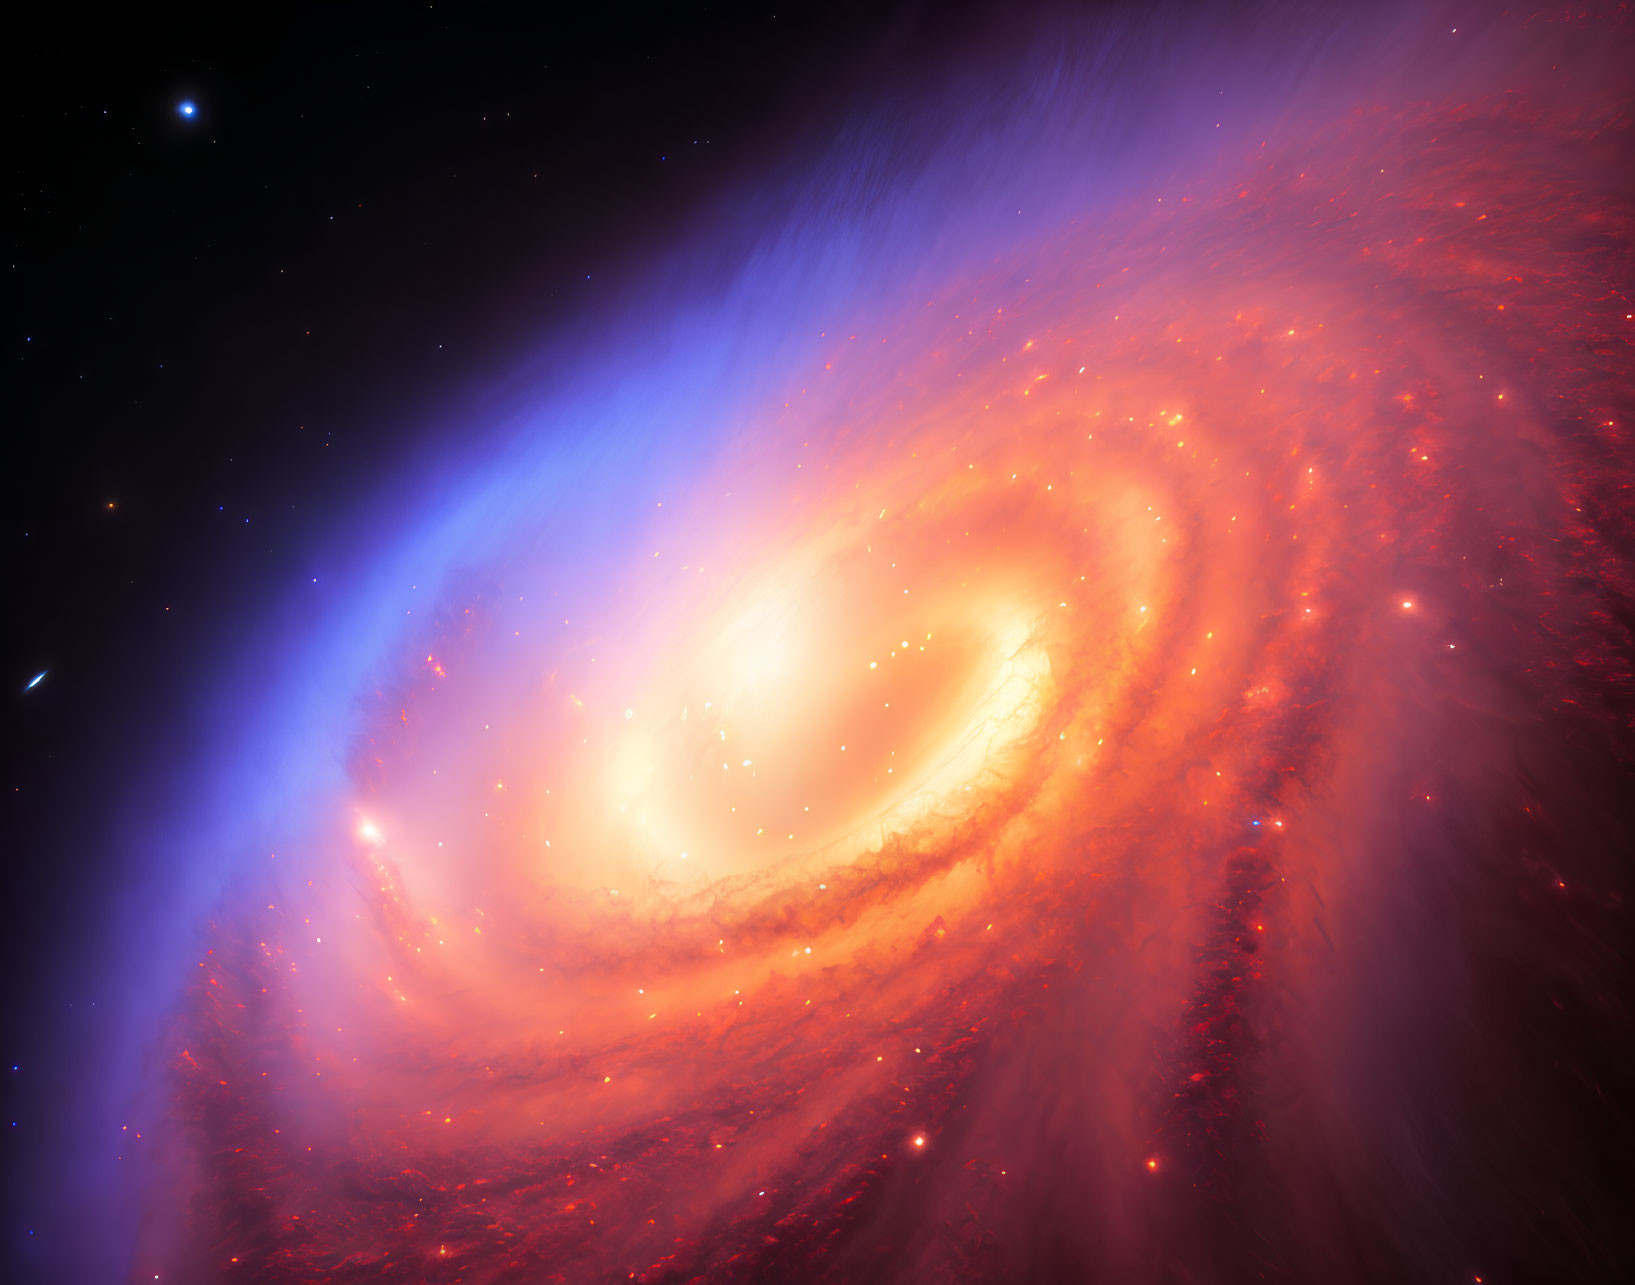 Colorful Spiral Galaxy with Red and Blue Swirling Arms in Dark Space